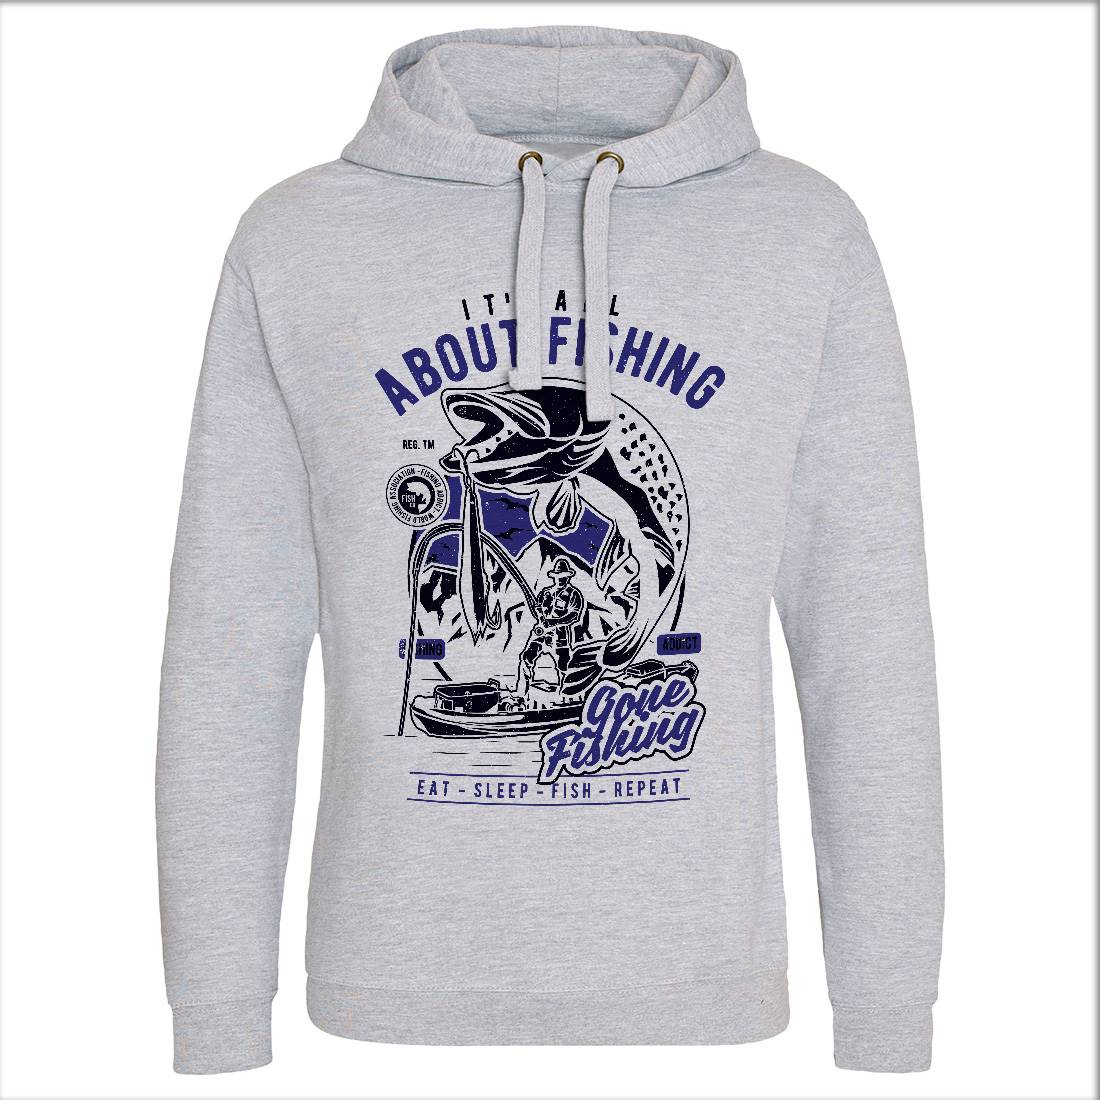 All About Mens Hoodie Without Pocket Fishing A604